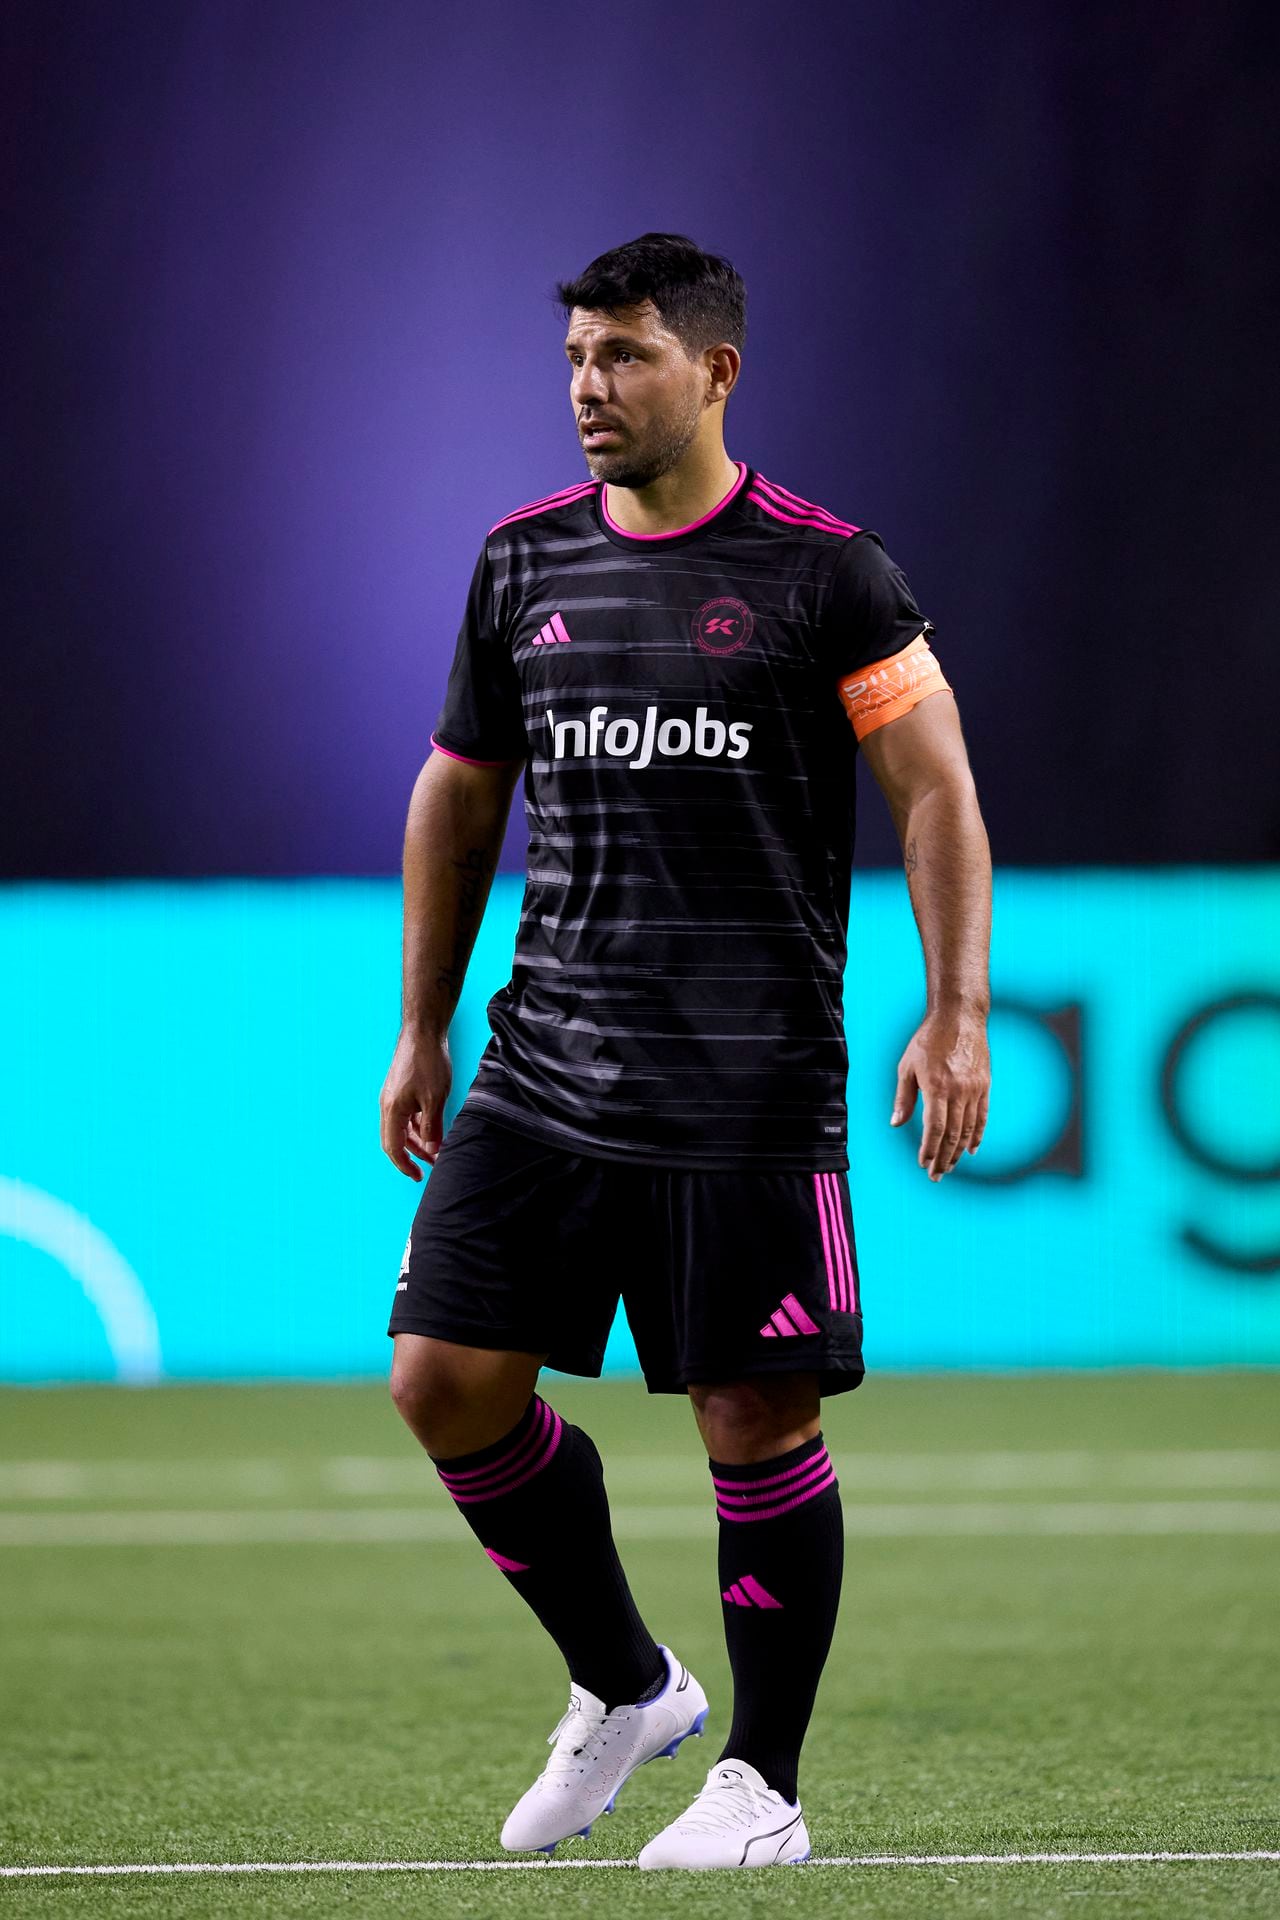 BARCELONA, SPAIN - JUNE 18: Sergio Aguero of Kunisports looks on during the round 7 of the Kings League Infojobs match between 1k FC and Kunisports at CUPRA Arena on June 18, 2023 in Barcelona, Spain. (Photo by Ion Alcoba/Quality Sport Images/Getty Images)